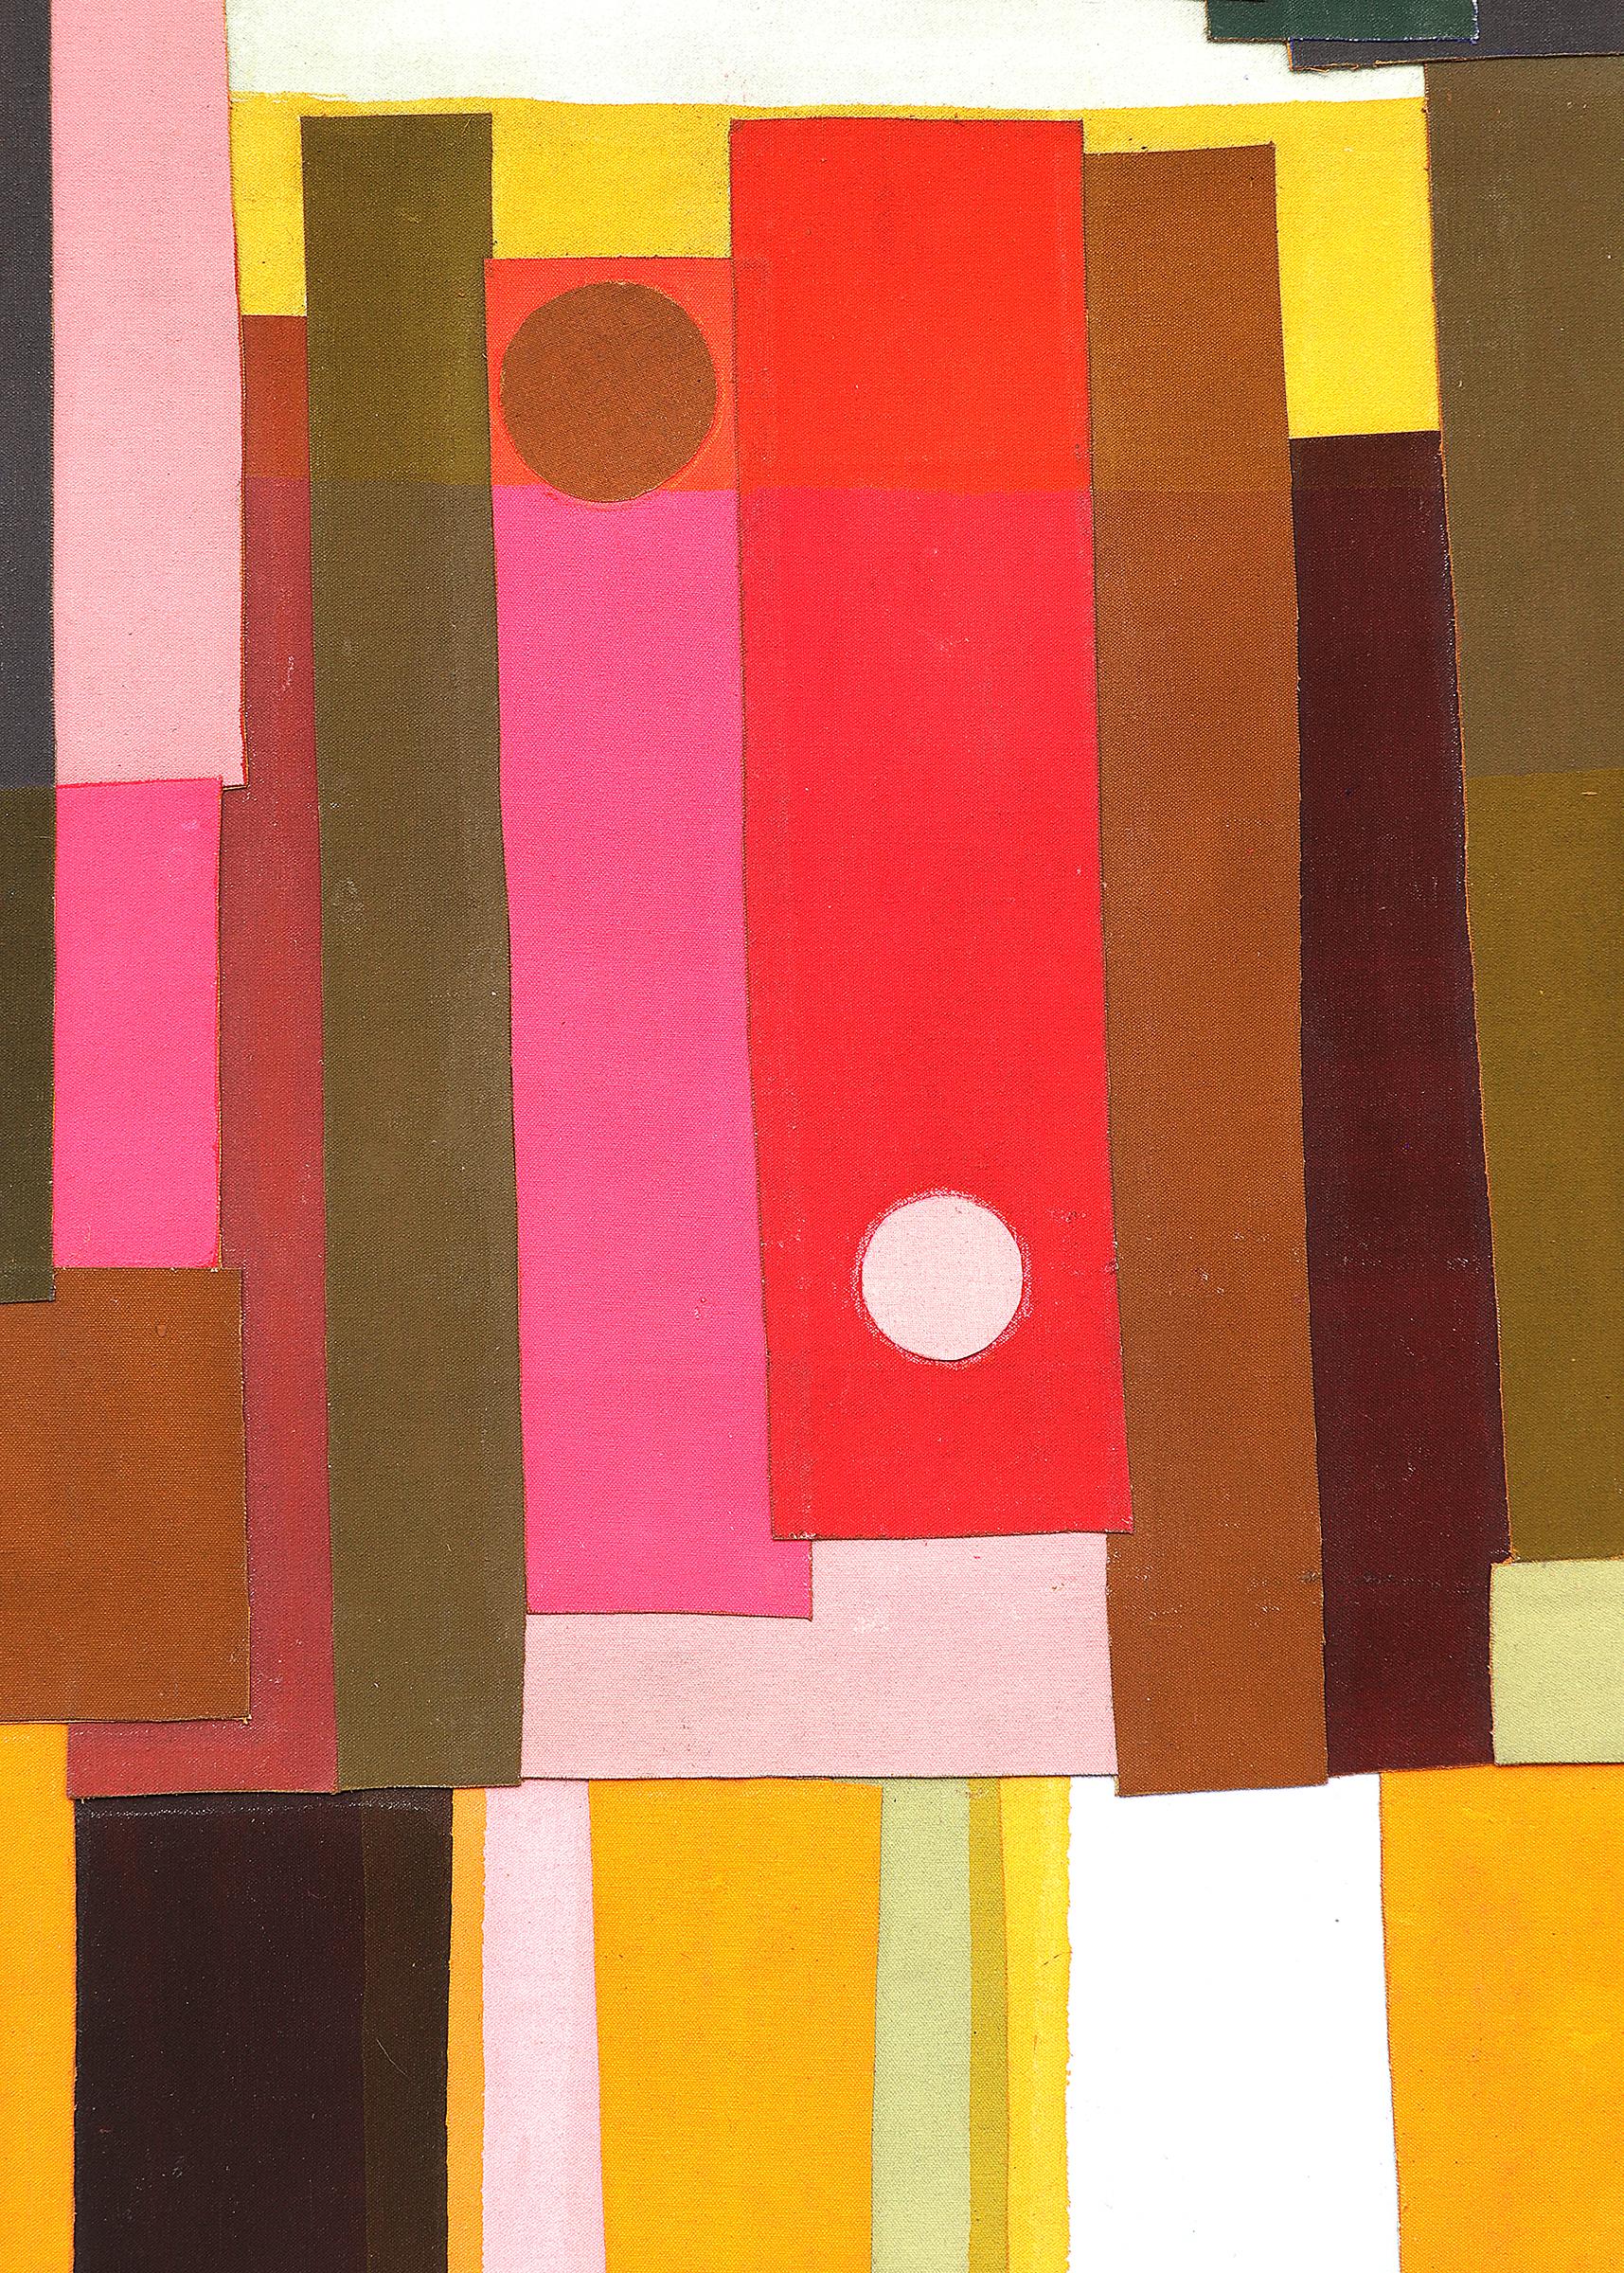 Suns and Moon, 1970s Bright Multi-Colored Abstract Geometric Shape Collage For Sale 2